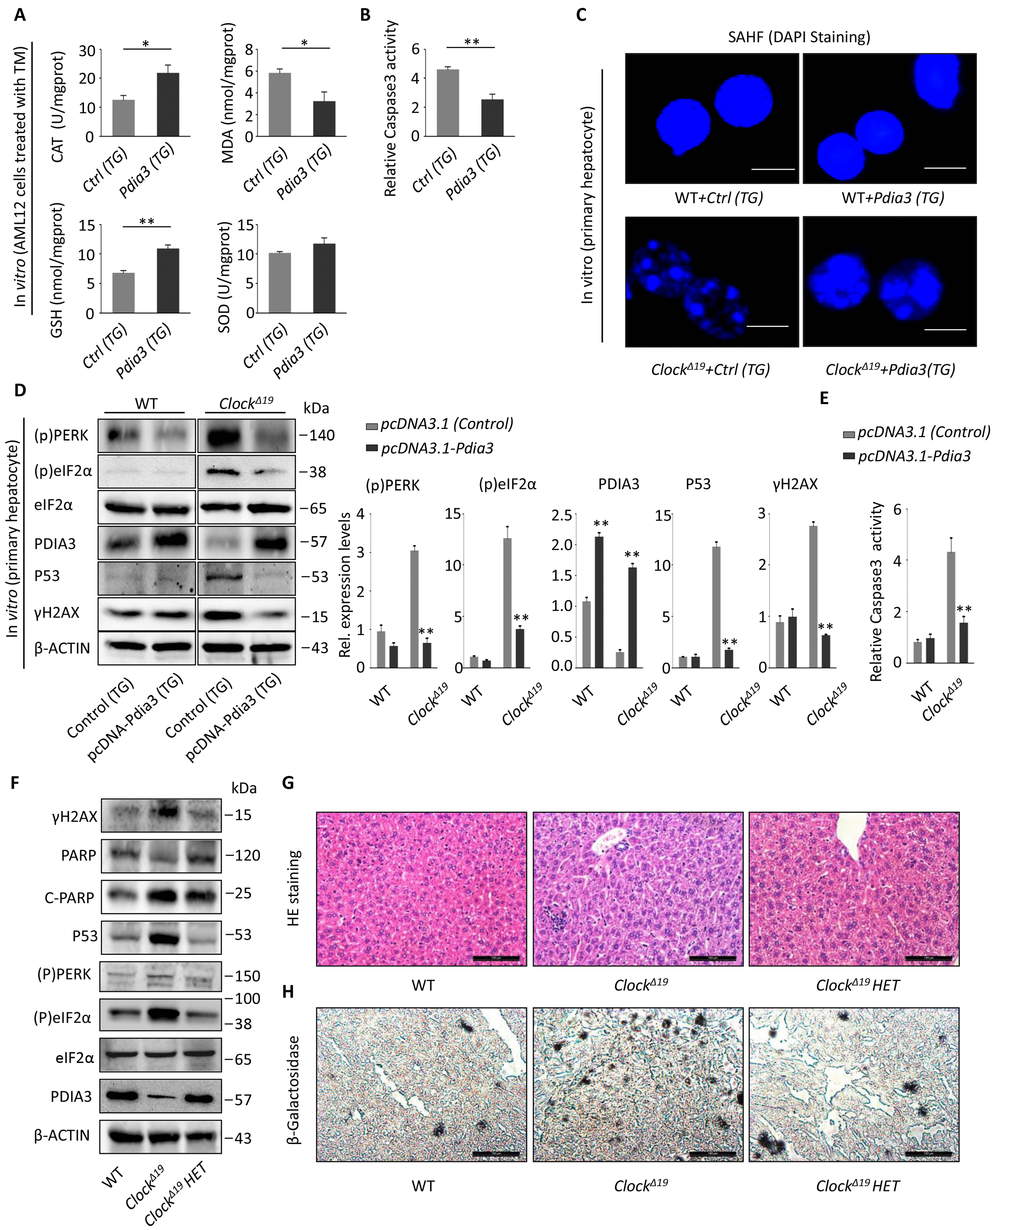 Pdia3 can reverse the aging process of the liver in ClockΔ19 mice. (A) AML12 cells were transfected with the pcDNA3.1-Pdia3 plasmid (Trans gene, TG) for 24 hours and then stimulated with TM stress (2 μg/mL) for 2 hours. SOD, MDA, GSH and CAT activity were analyzed in the cell homogenate. (n=4) **, PPB) AML12 cells were treated as described in (A), and the activity of Caspase 3 was measured to reflect apoptotic activity. (n=4) **, P (C) SAHF stained via DAPI were visualized by fluorescence microscopy. The primary hepatocytes were extracted, and the number of SAHF was observed after transfection with the pcDNA3.1-Pdia3 plasmid for 24 hours. The SAHF were greatly rescued in ClockΔ19+Pdia3(TG) cells (n=3). (D) The primary liver cells were extracted and transfected with the pcDNA3.1-Pdia3 plasmid for 48 hours. Immunoblotting methods were used to detect the expression of UPR proteins (p)PERK and (p)eIF2α, PDIA3, senescent protein P53, and DNA damage protein γ-H2AX. The statistical results are displayed (right). The results are expressed as the mean ± S.E.M (n=4). **, P  0.01 and *, P  0.05. (E) Primary liver cells were extracted and treated as described in (D). Then, the relative activity of Caspase 3 was detected to reflect the level of apoptosis. Note that the apoptotic activity was significantly reduced after transfection with Pdia3. (n=4) **, PPF) Immunoblots showing the expression levels of γH2AX, PARP, P53, (p)PERK, (p)eIF2a and PDIA3 in the WT, ClockΔ19 and ClockΔ19 heterozygote groups (36 week old). n=3 for all groups. (G-H) Histological analysis of mice as described in (F). HE and SA-β-gal staining of the liver tissue. (n=3 for all groups). Note that the ClockΔ19 HET mice show a decreased inflammation foci and improved aging phenotype.